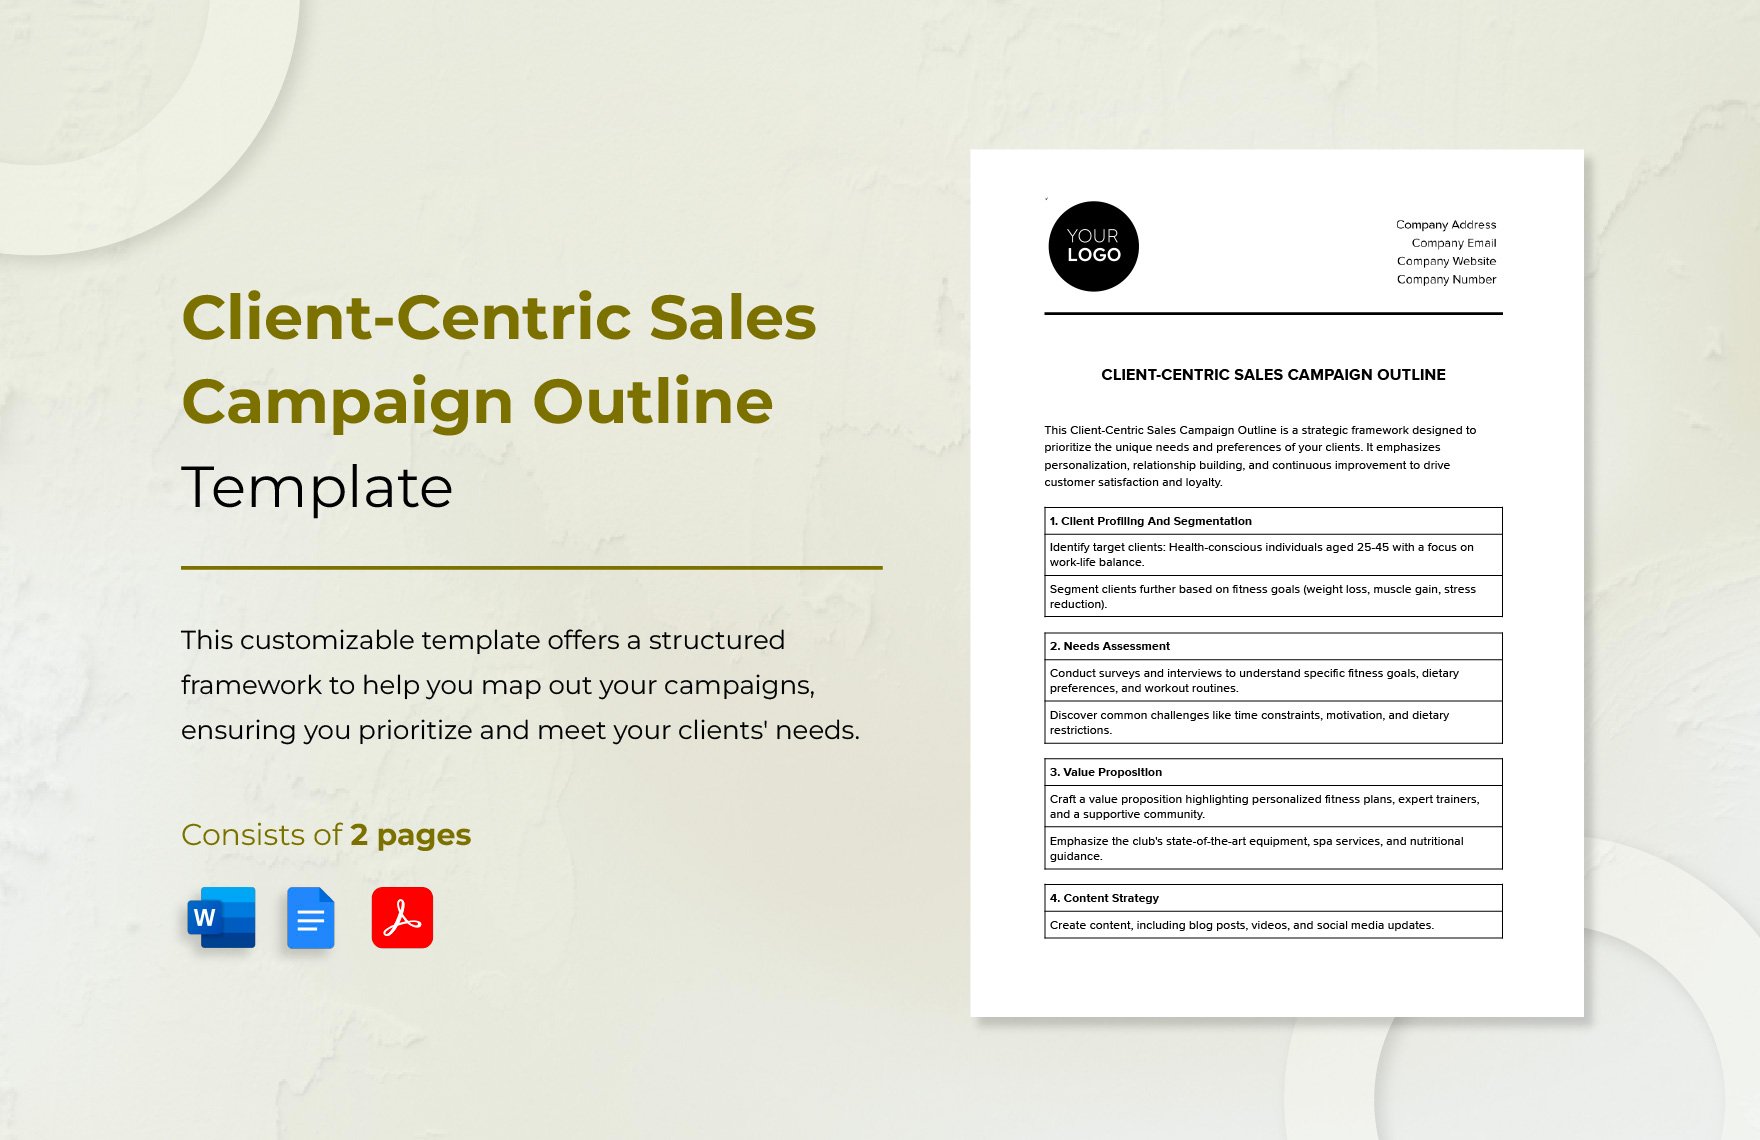 Client-centric Sales Campaign Outline Template in Word, Google Docs, PDF